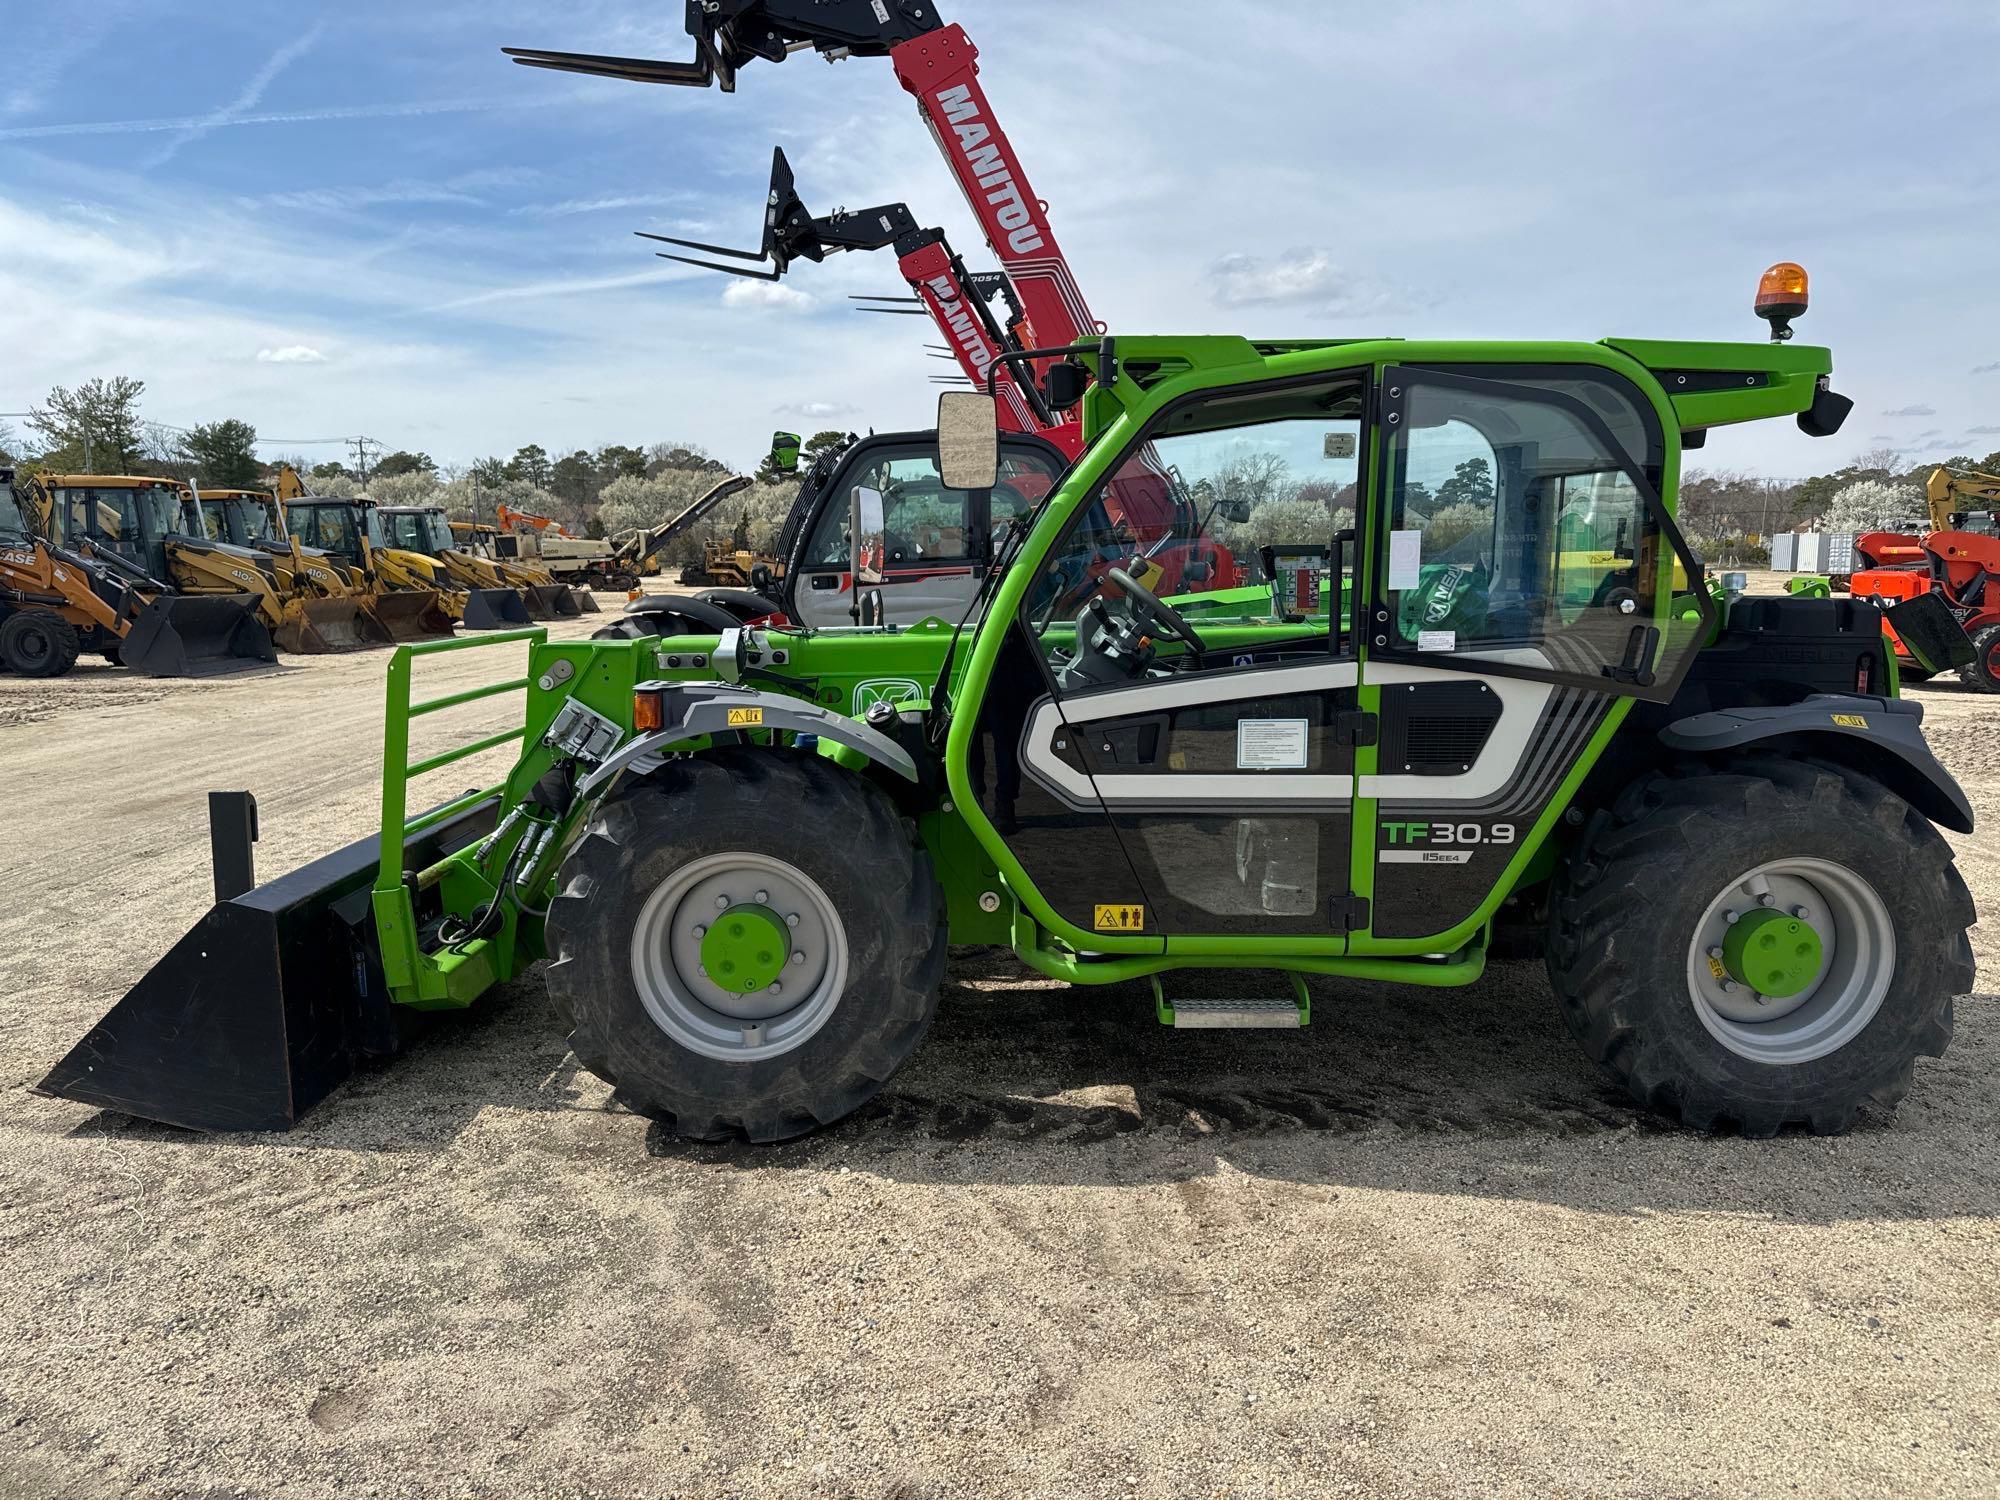 DEMO MERLO 30.9 TELESCOPIC FORKLIFTSN-000788...... 4x4, powered by diesel engine, equipped with EROP